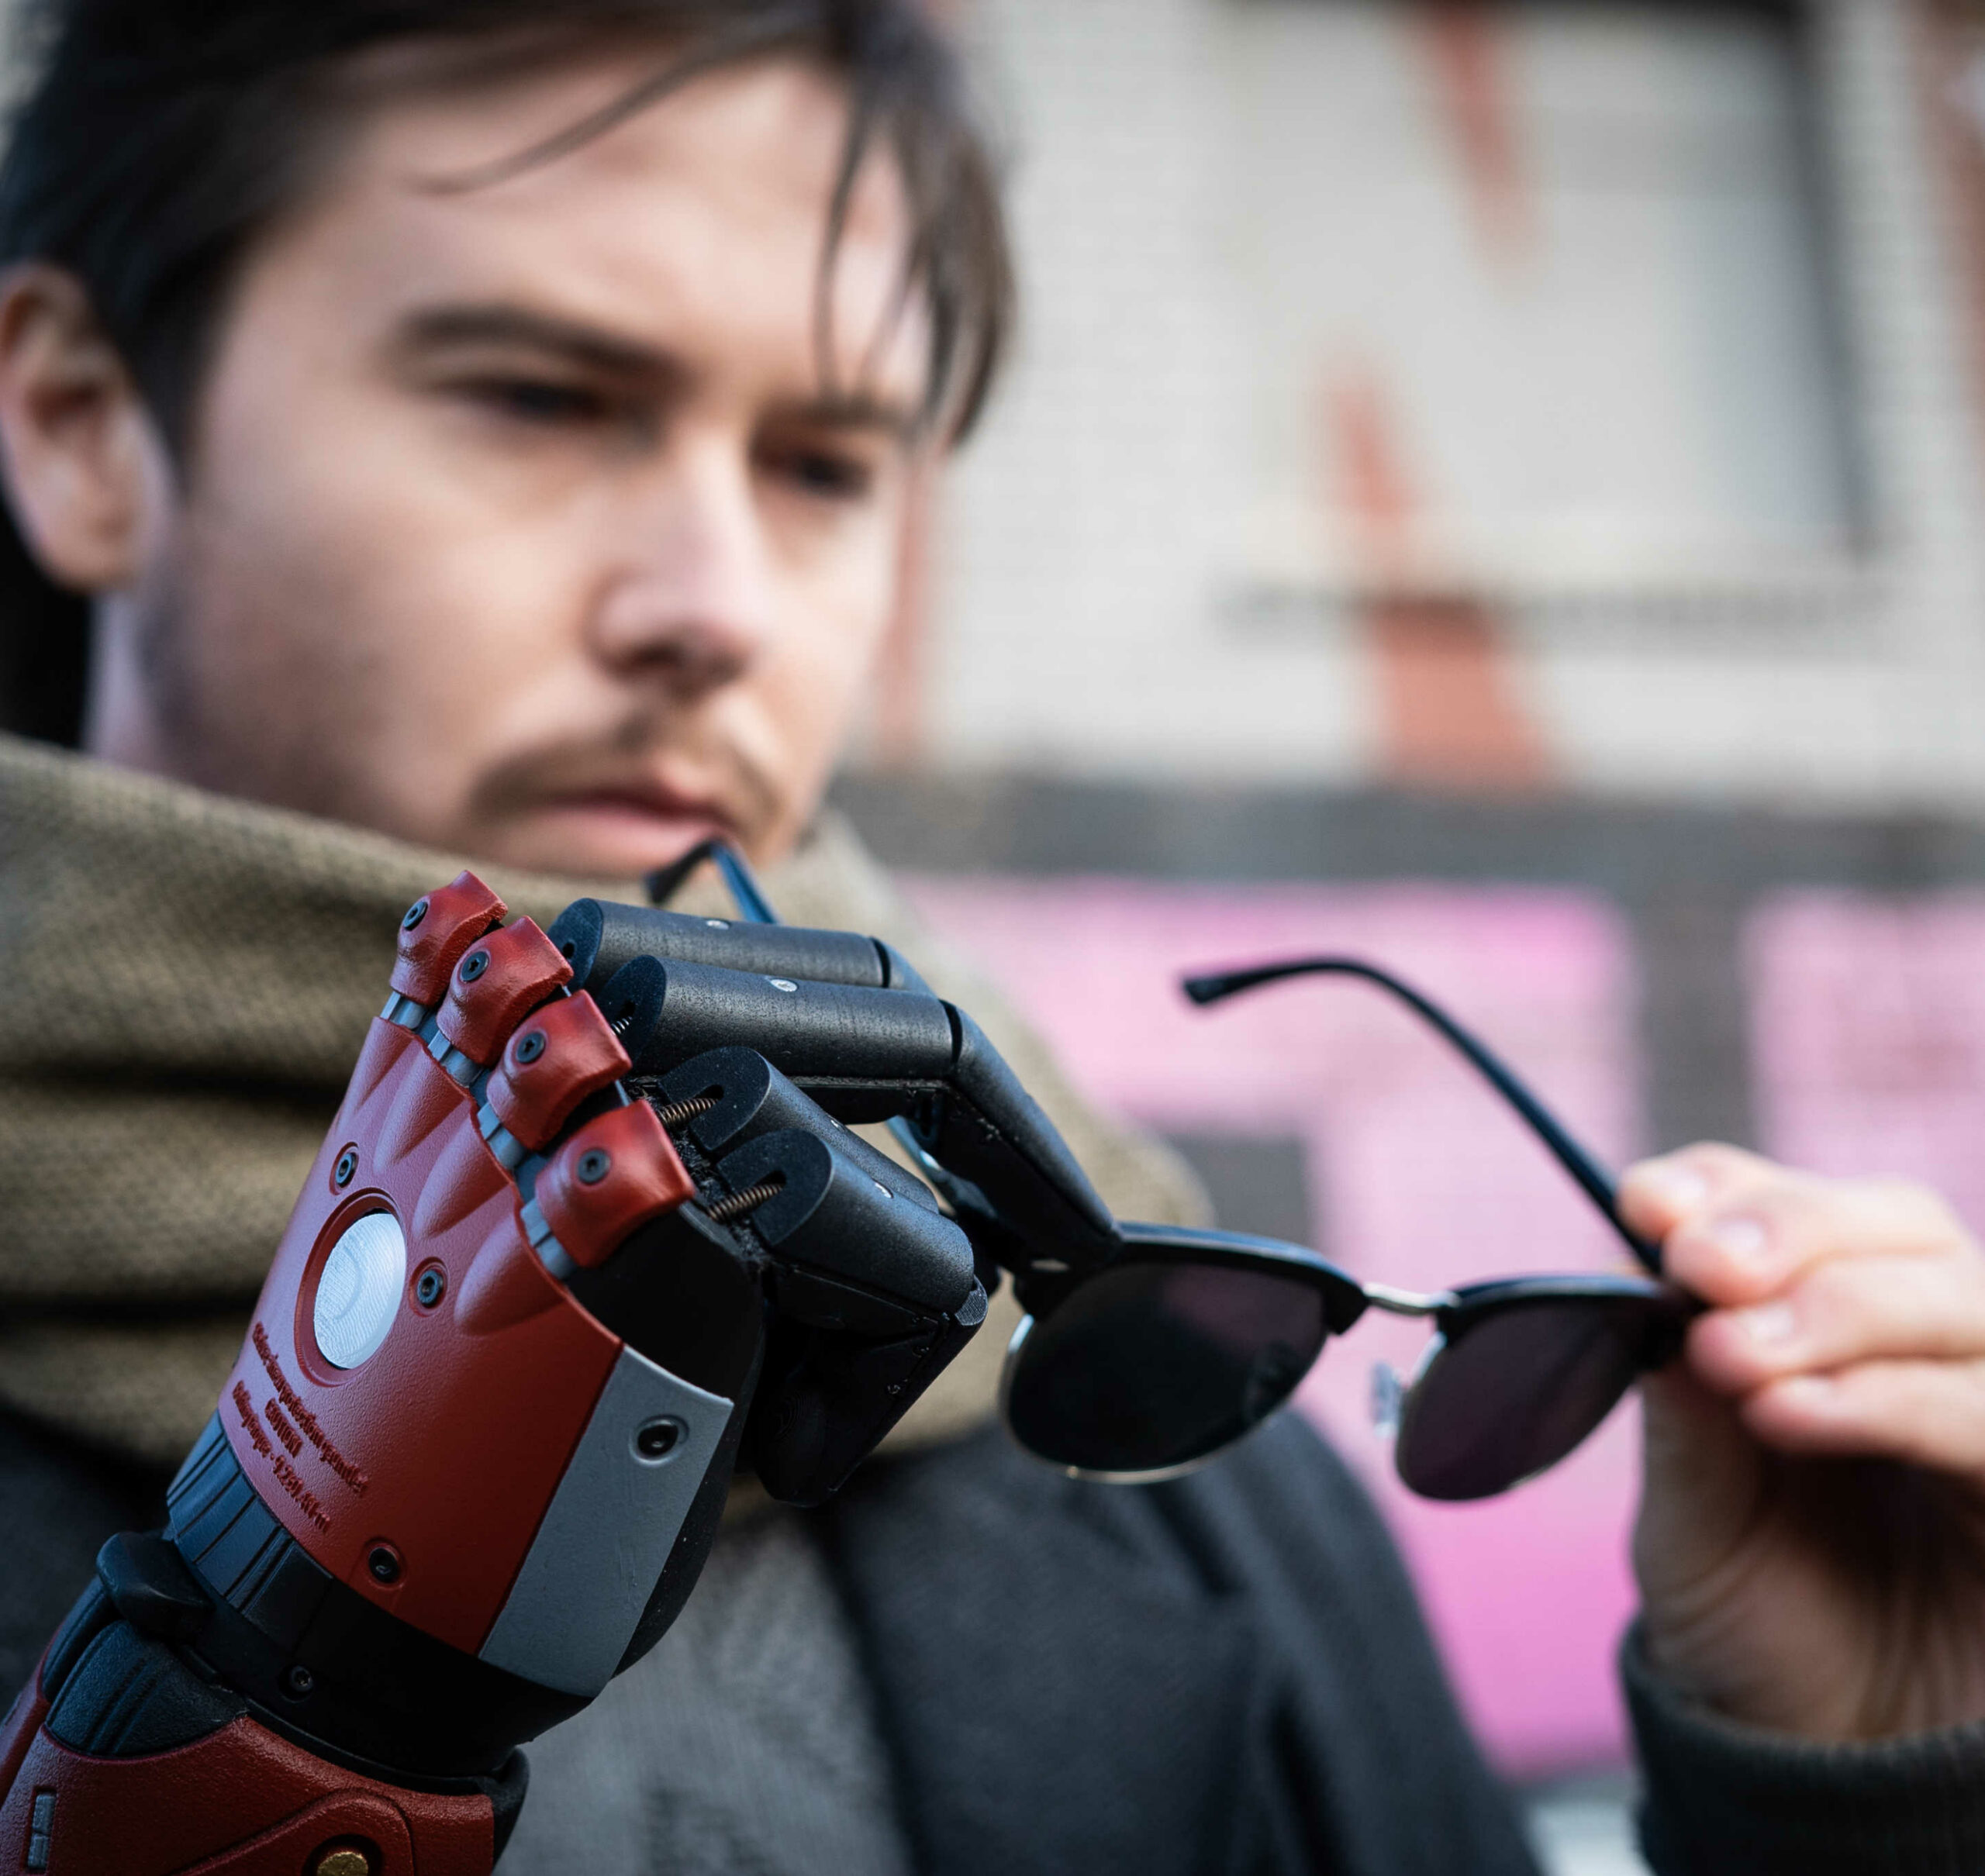 The Hero Arm Is A Prosthetic Arm Made By Open Bionics 